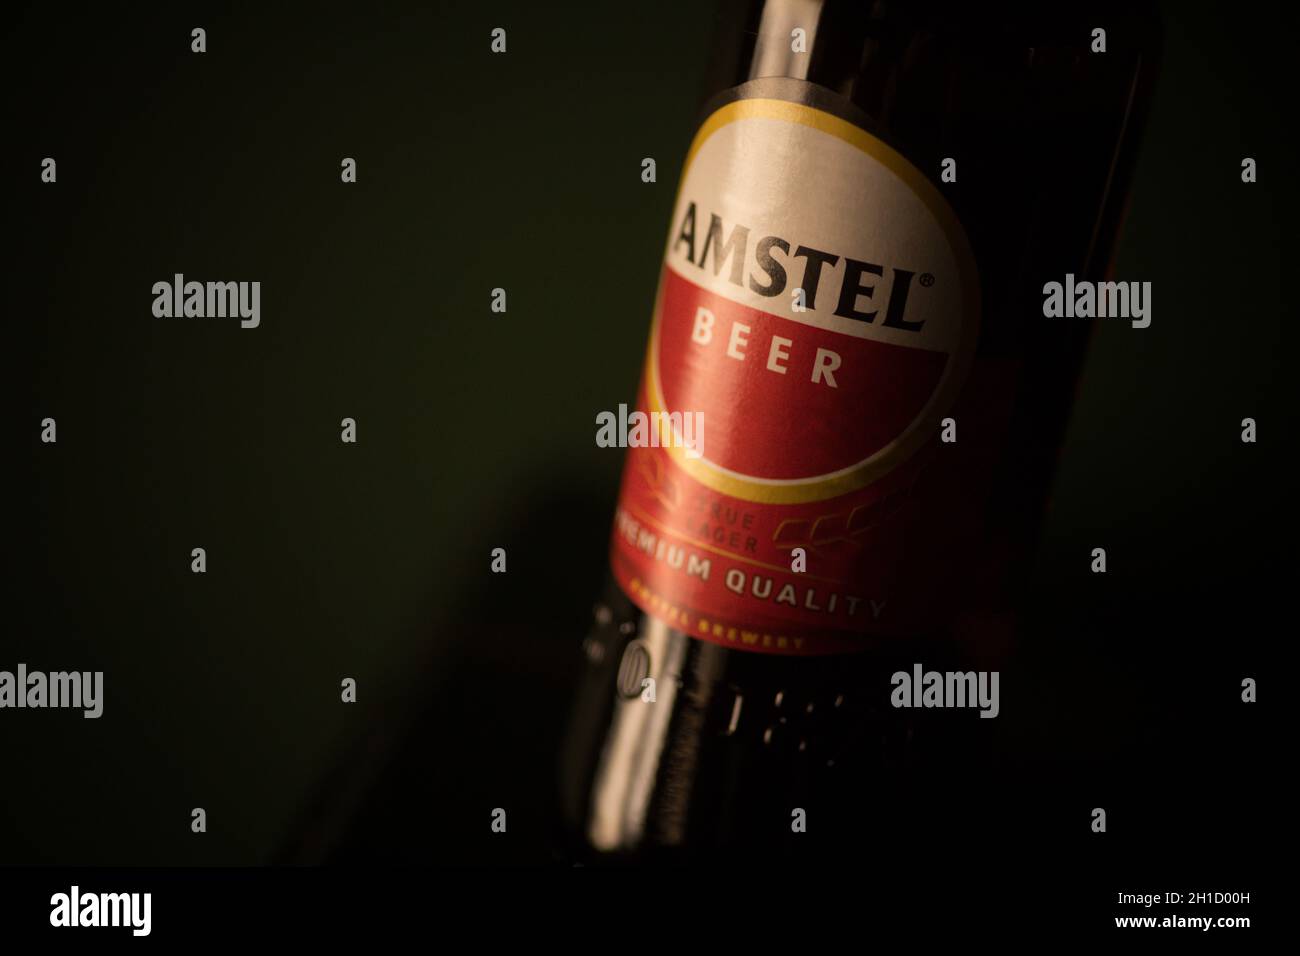 Bucharest Romania - February 16, 2020: Illustrative editorial shot a bottle of Amstel beer in Bucharest, Romania. Stock Photo